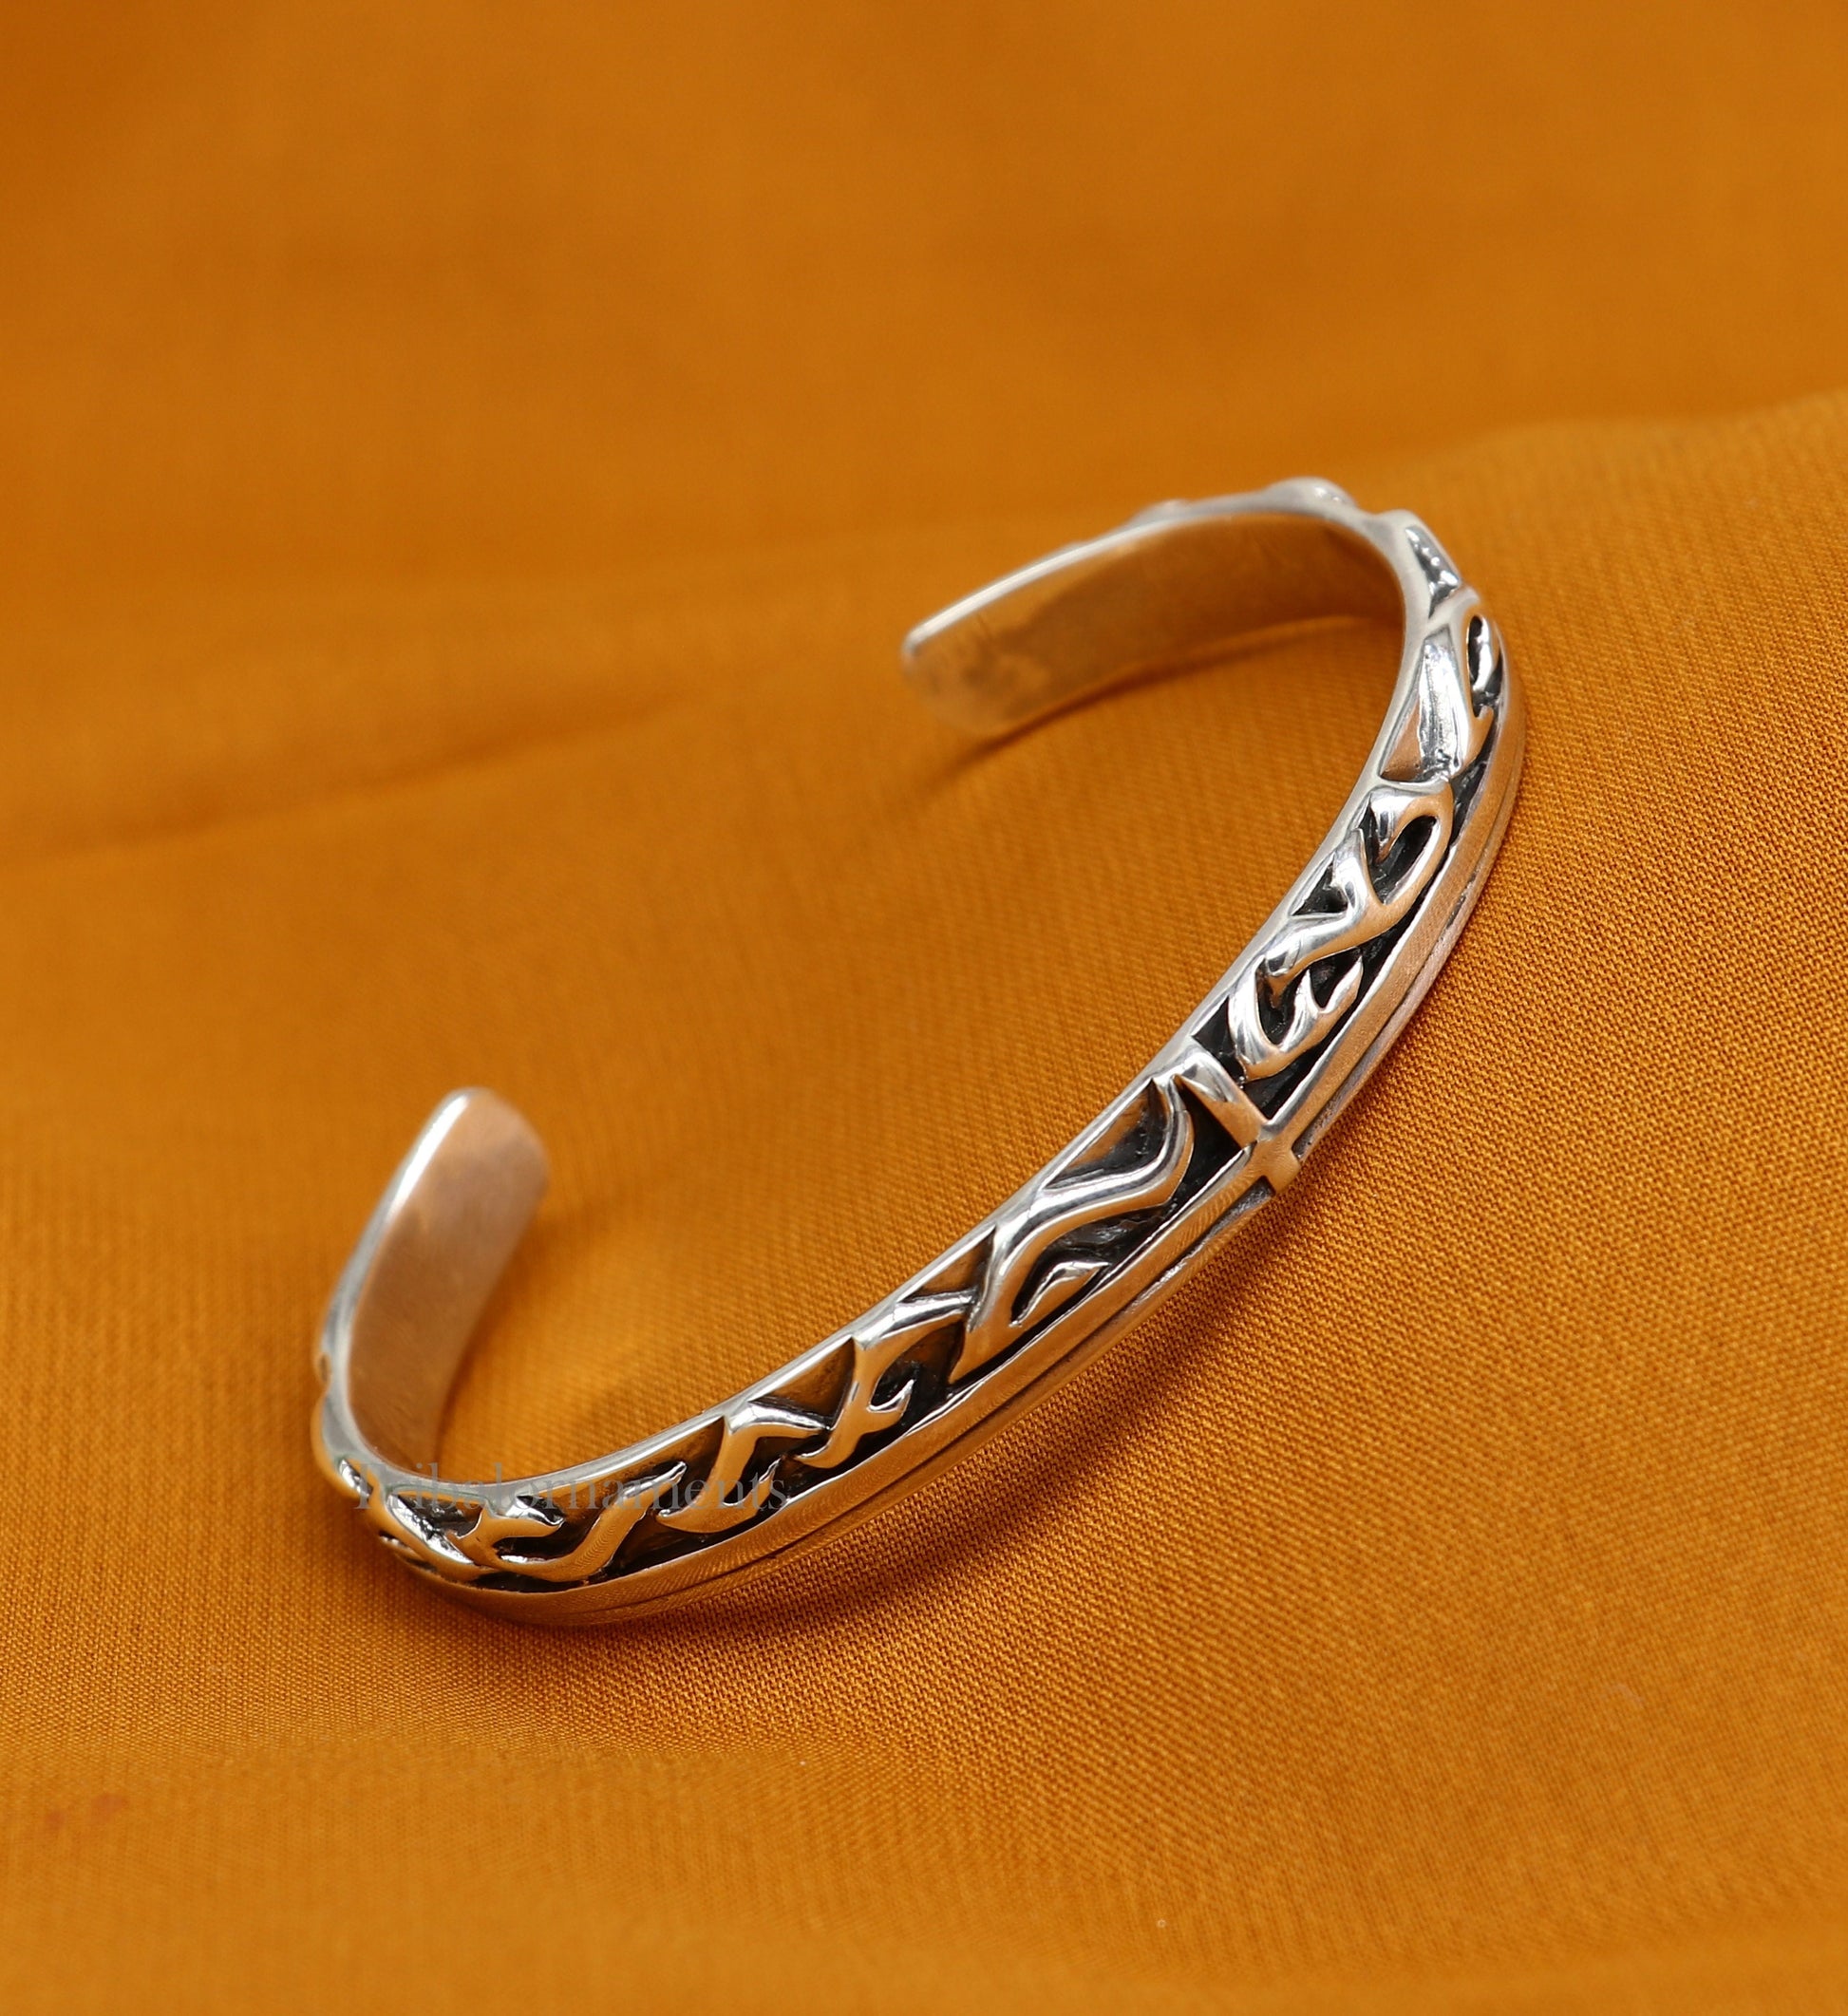 Vintage antique style 925 sterling silver handmade adjustable cuff bangle bracelet unsex gifting jewelry, solid cuff bracelet nsk372 - TRIBAL ORNAMENTS